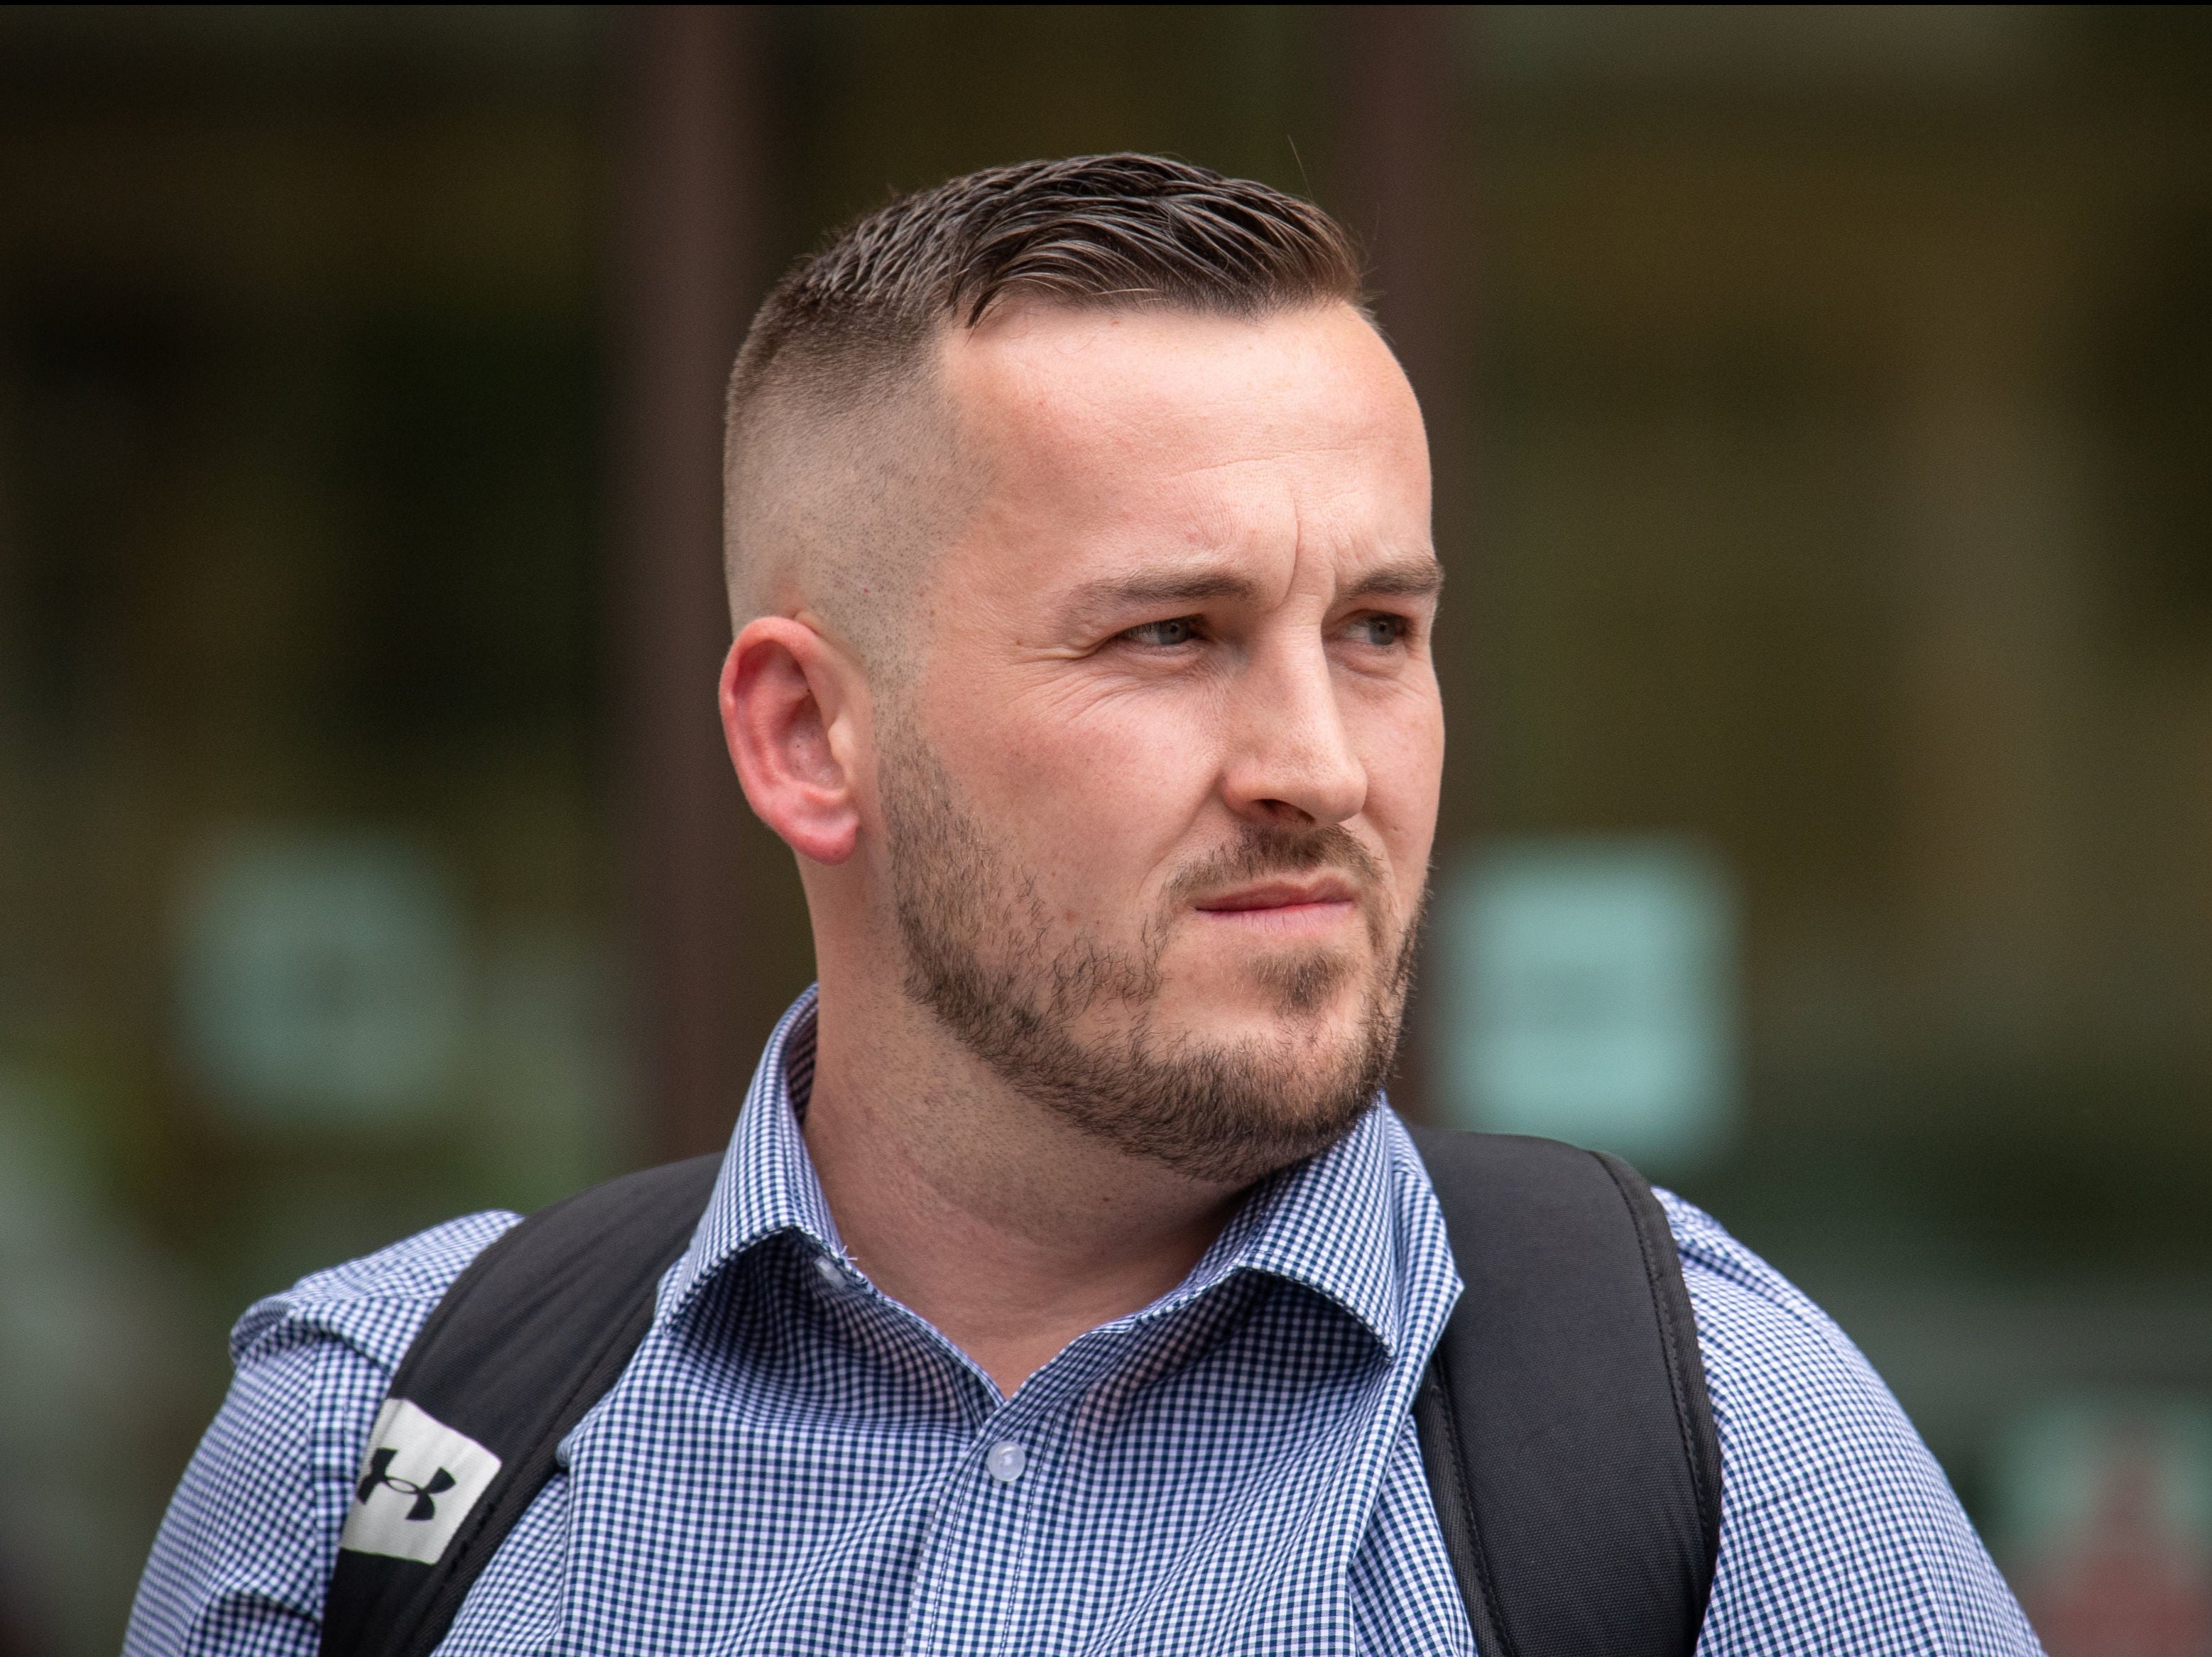 James Goddard pictured outside Westminster Magistrates’ Court in June 2019